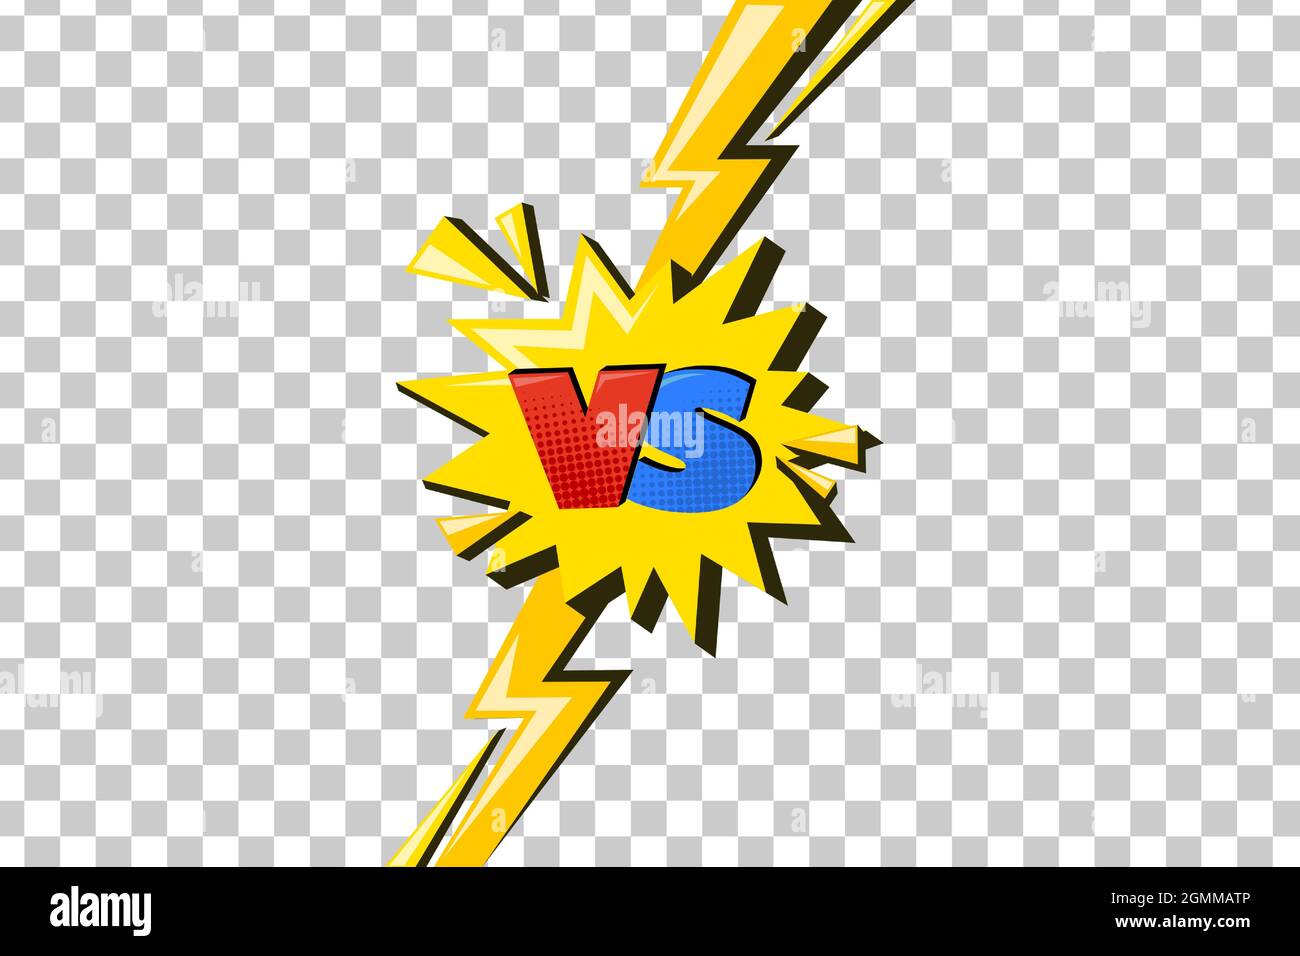 Versus comic design with lightning. Yellow flash with vs symbol in star speech bubble. Vector illustration isolated in transparent background Stock Vector